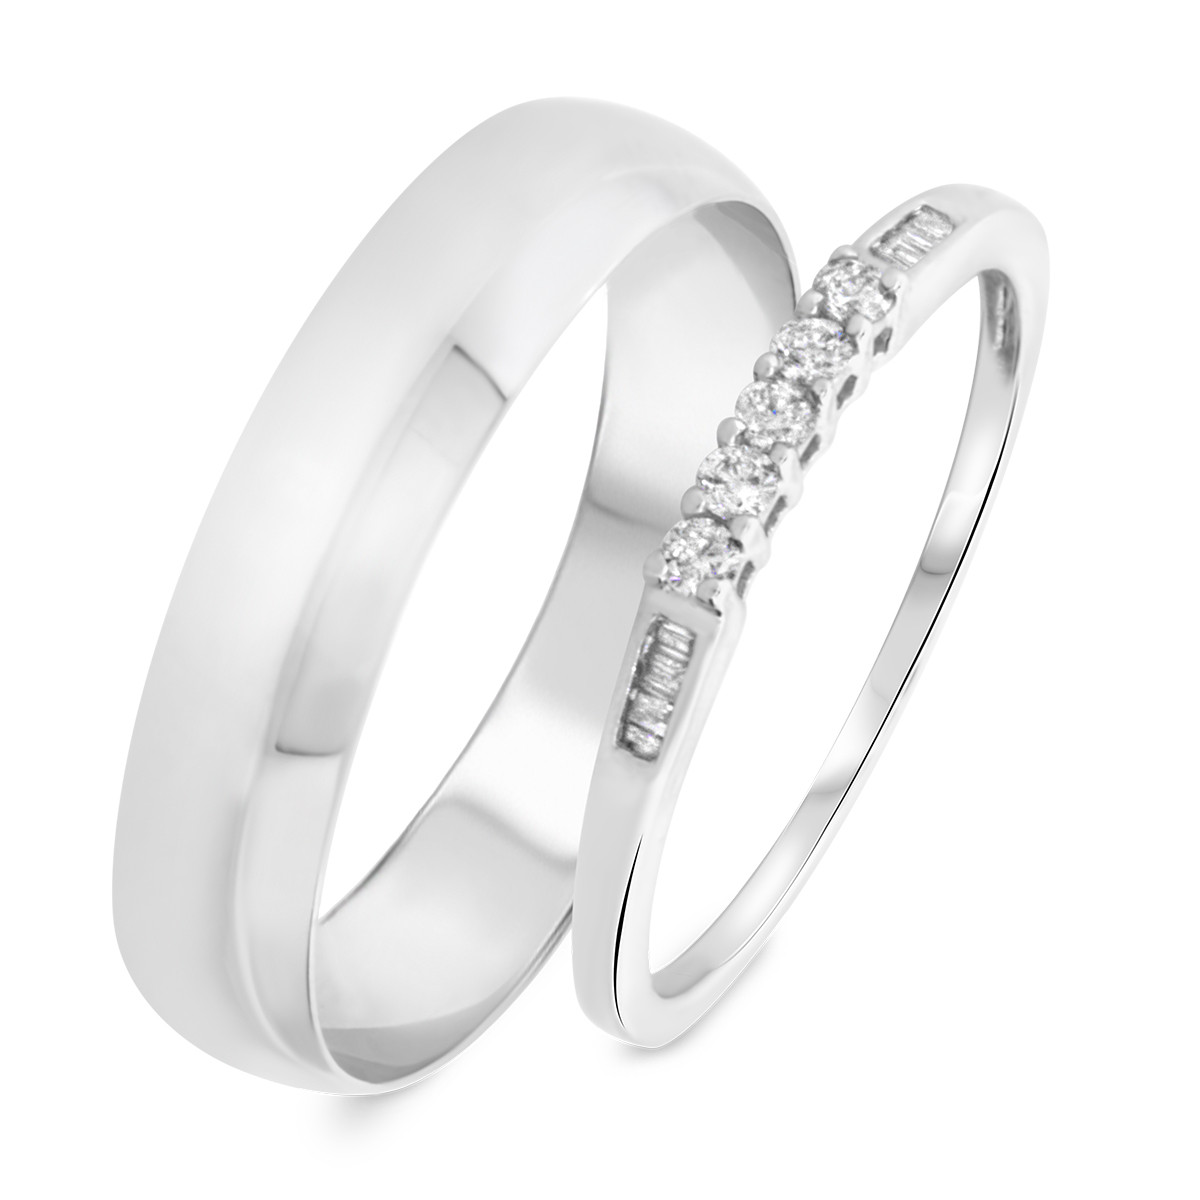 Wedding Band Sets His And Hers
 1 1 6 Carat T W Round Baguette Cut Diamond His and Hers